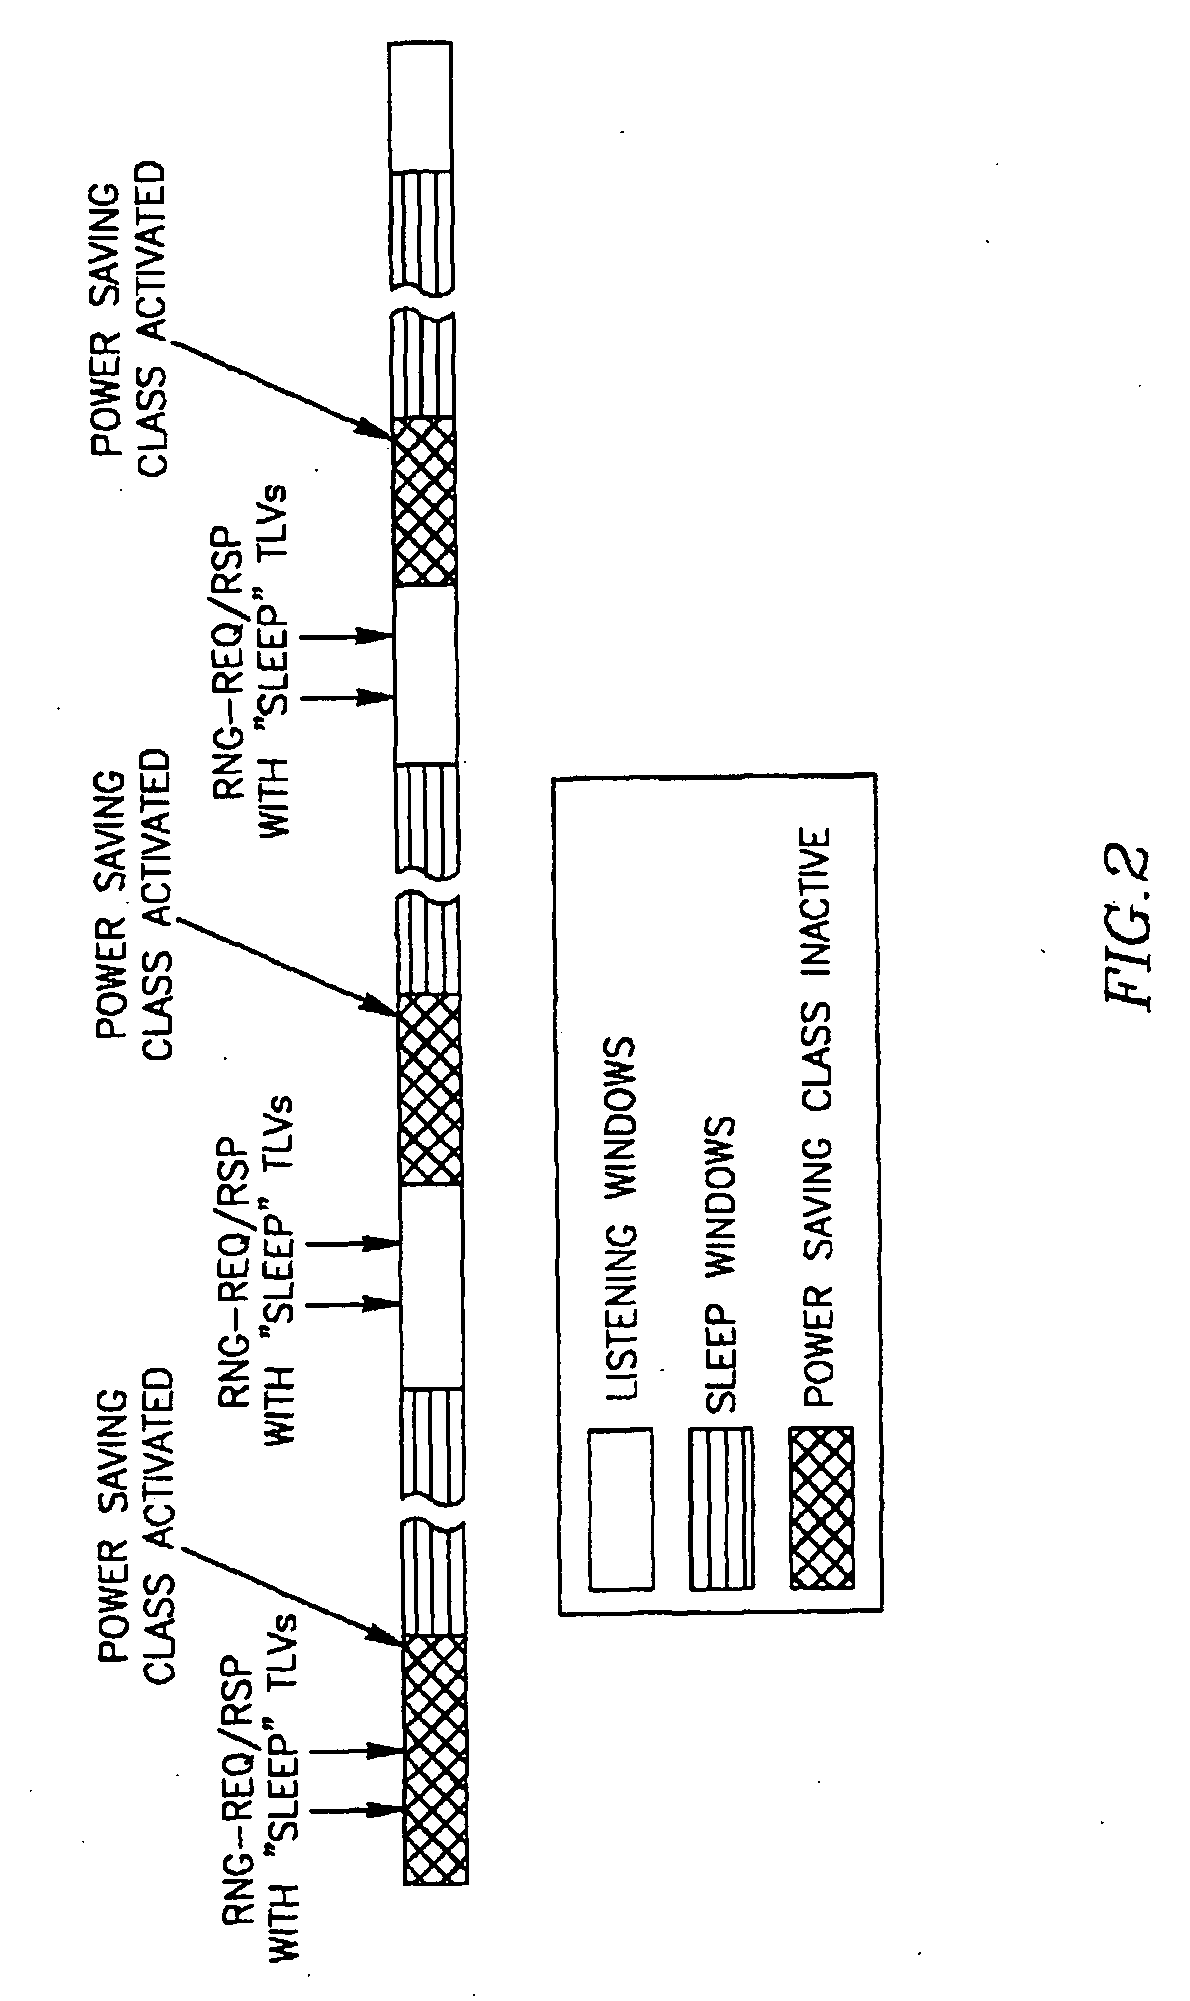 Method and Apparatus for Power Saving in Wirelless Systems